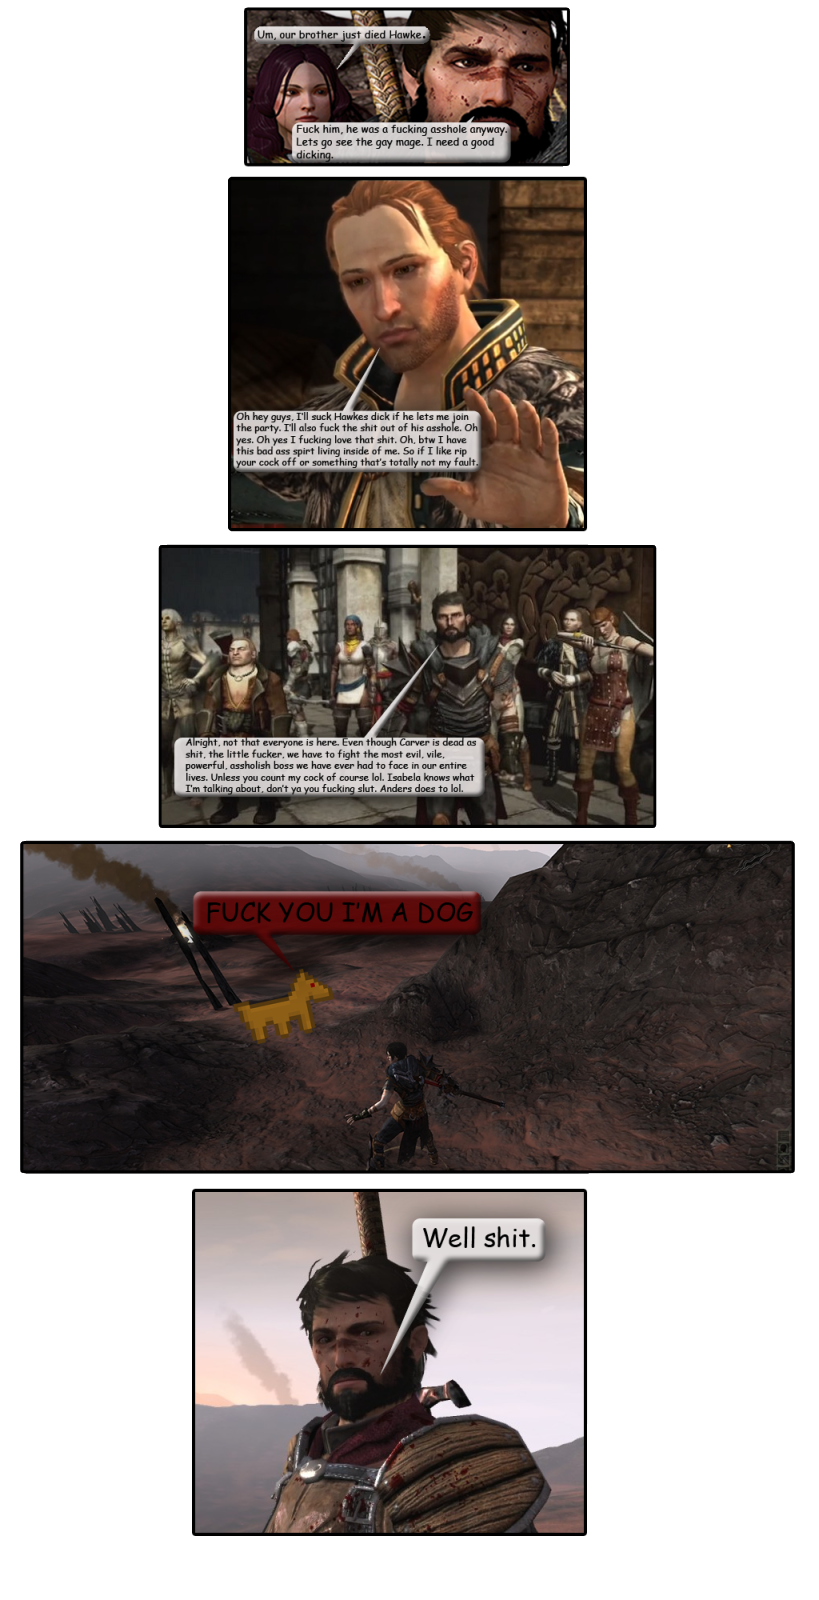 #7 Then there was a shitty Dragon Age comic